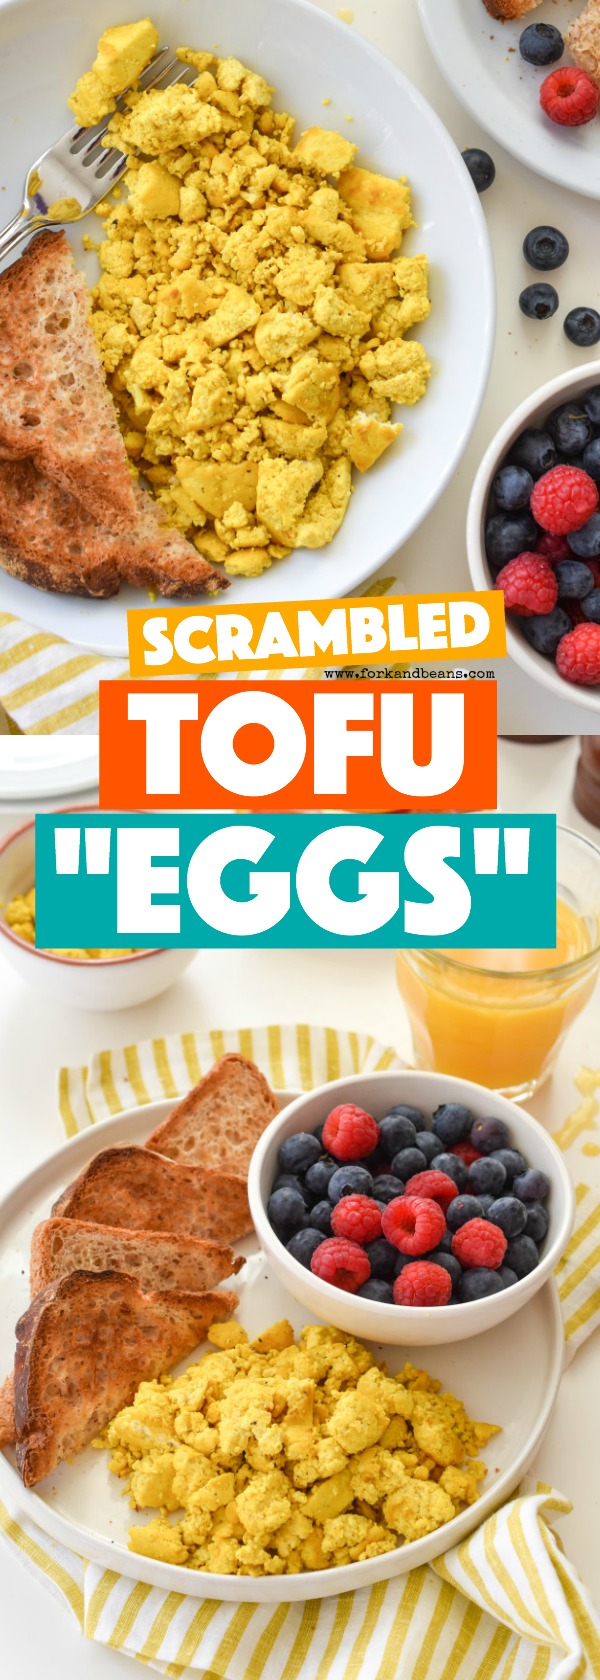 A photo compilation of a breakfast table with a plate of tofu scrambled eggs